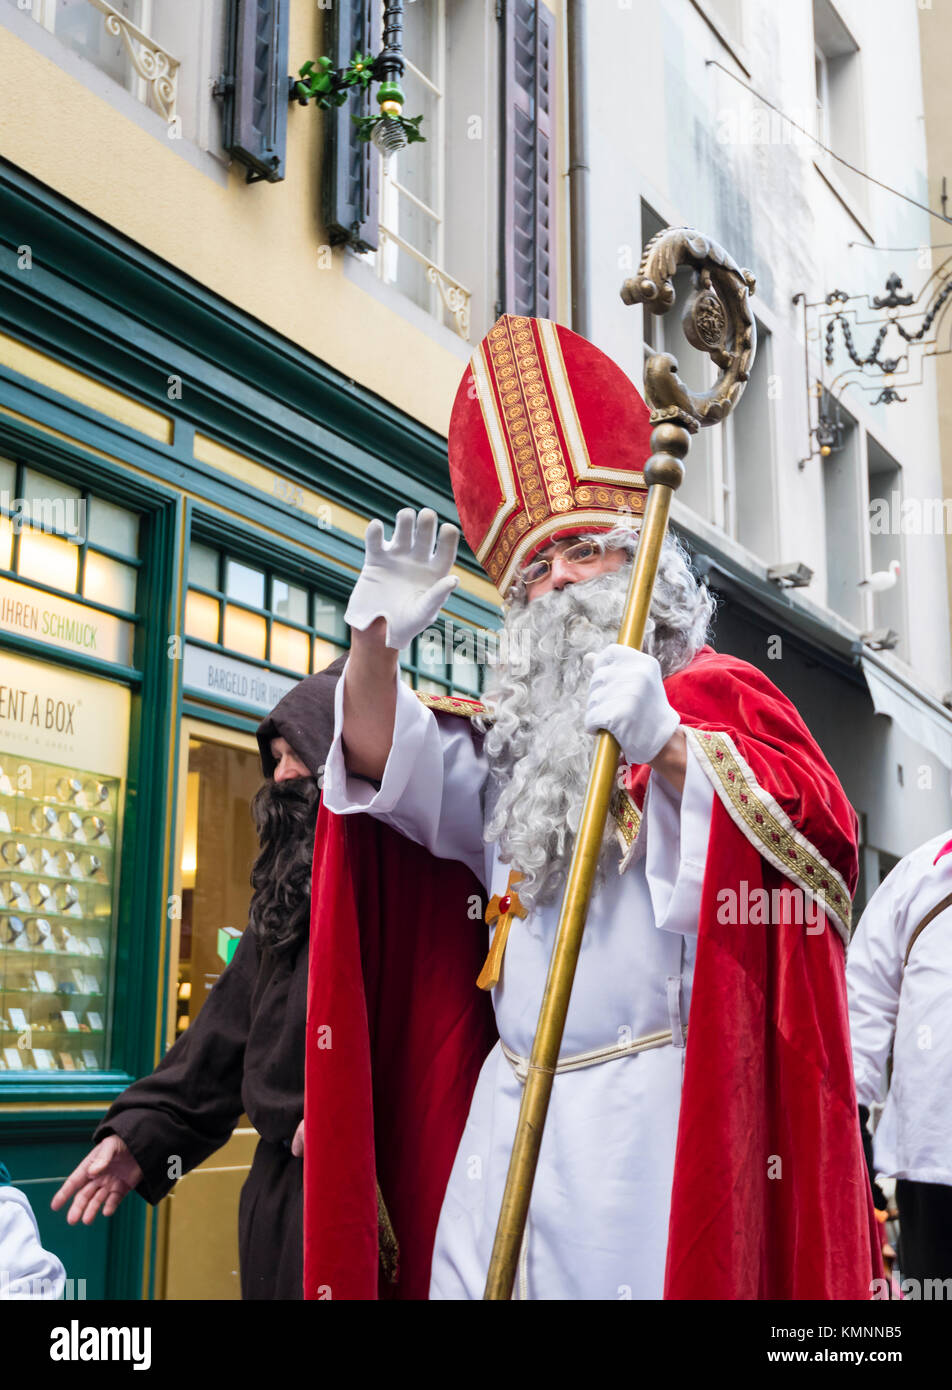 Lucerne, Switzerland - 2 Dec 2017: St. Nicholas, followed by his servant 'Knecht Ruprecht'  is waving to spectators during a Christmas parade. Stock Photo